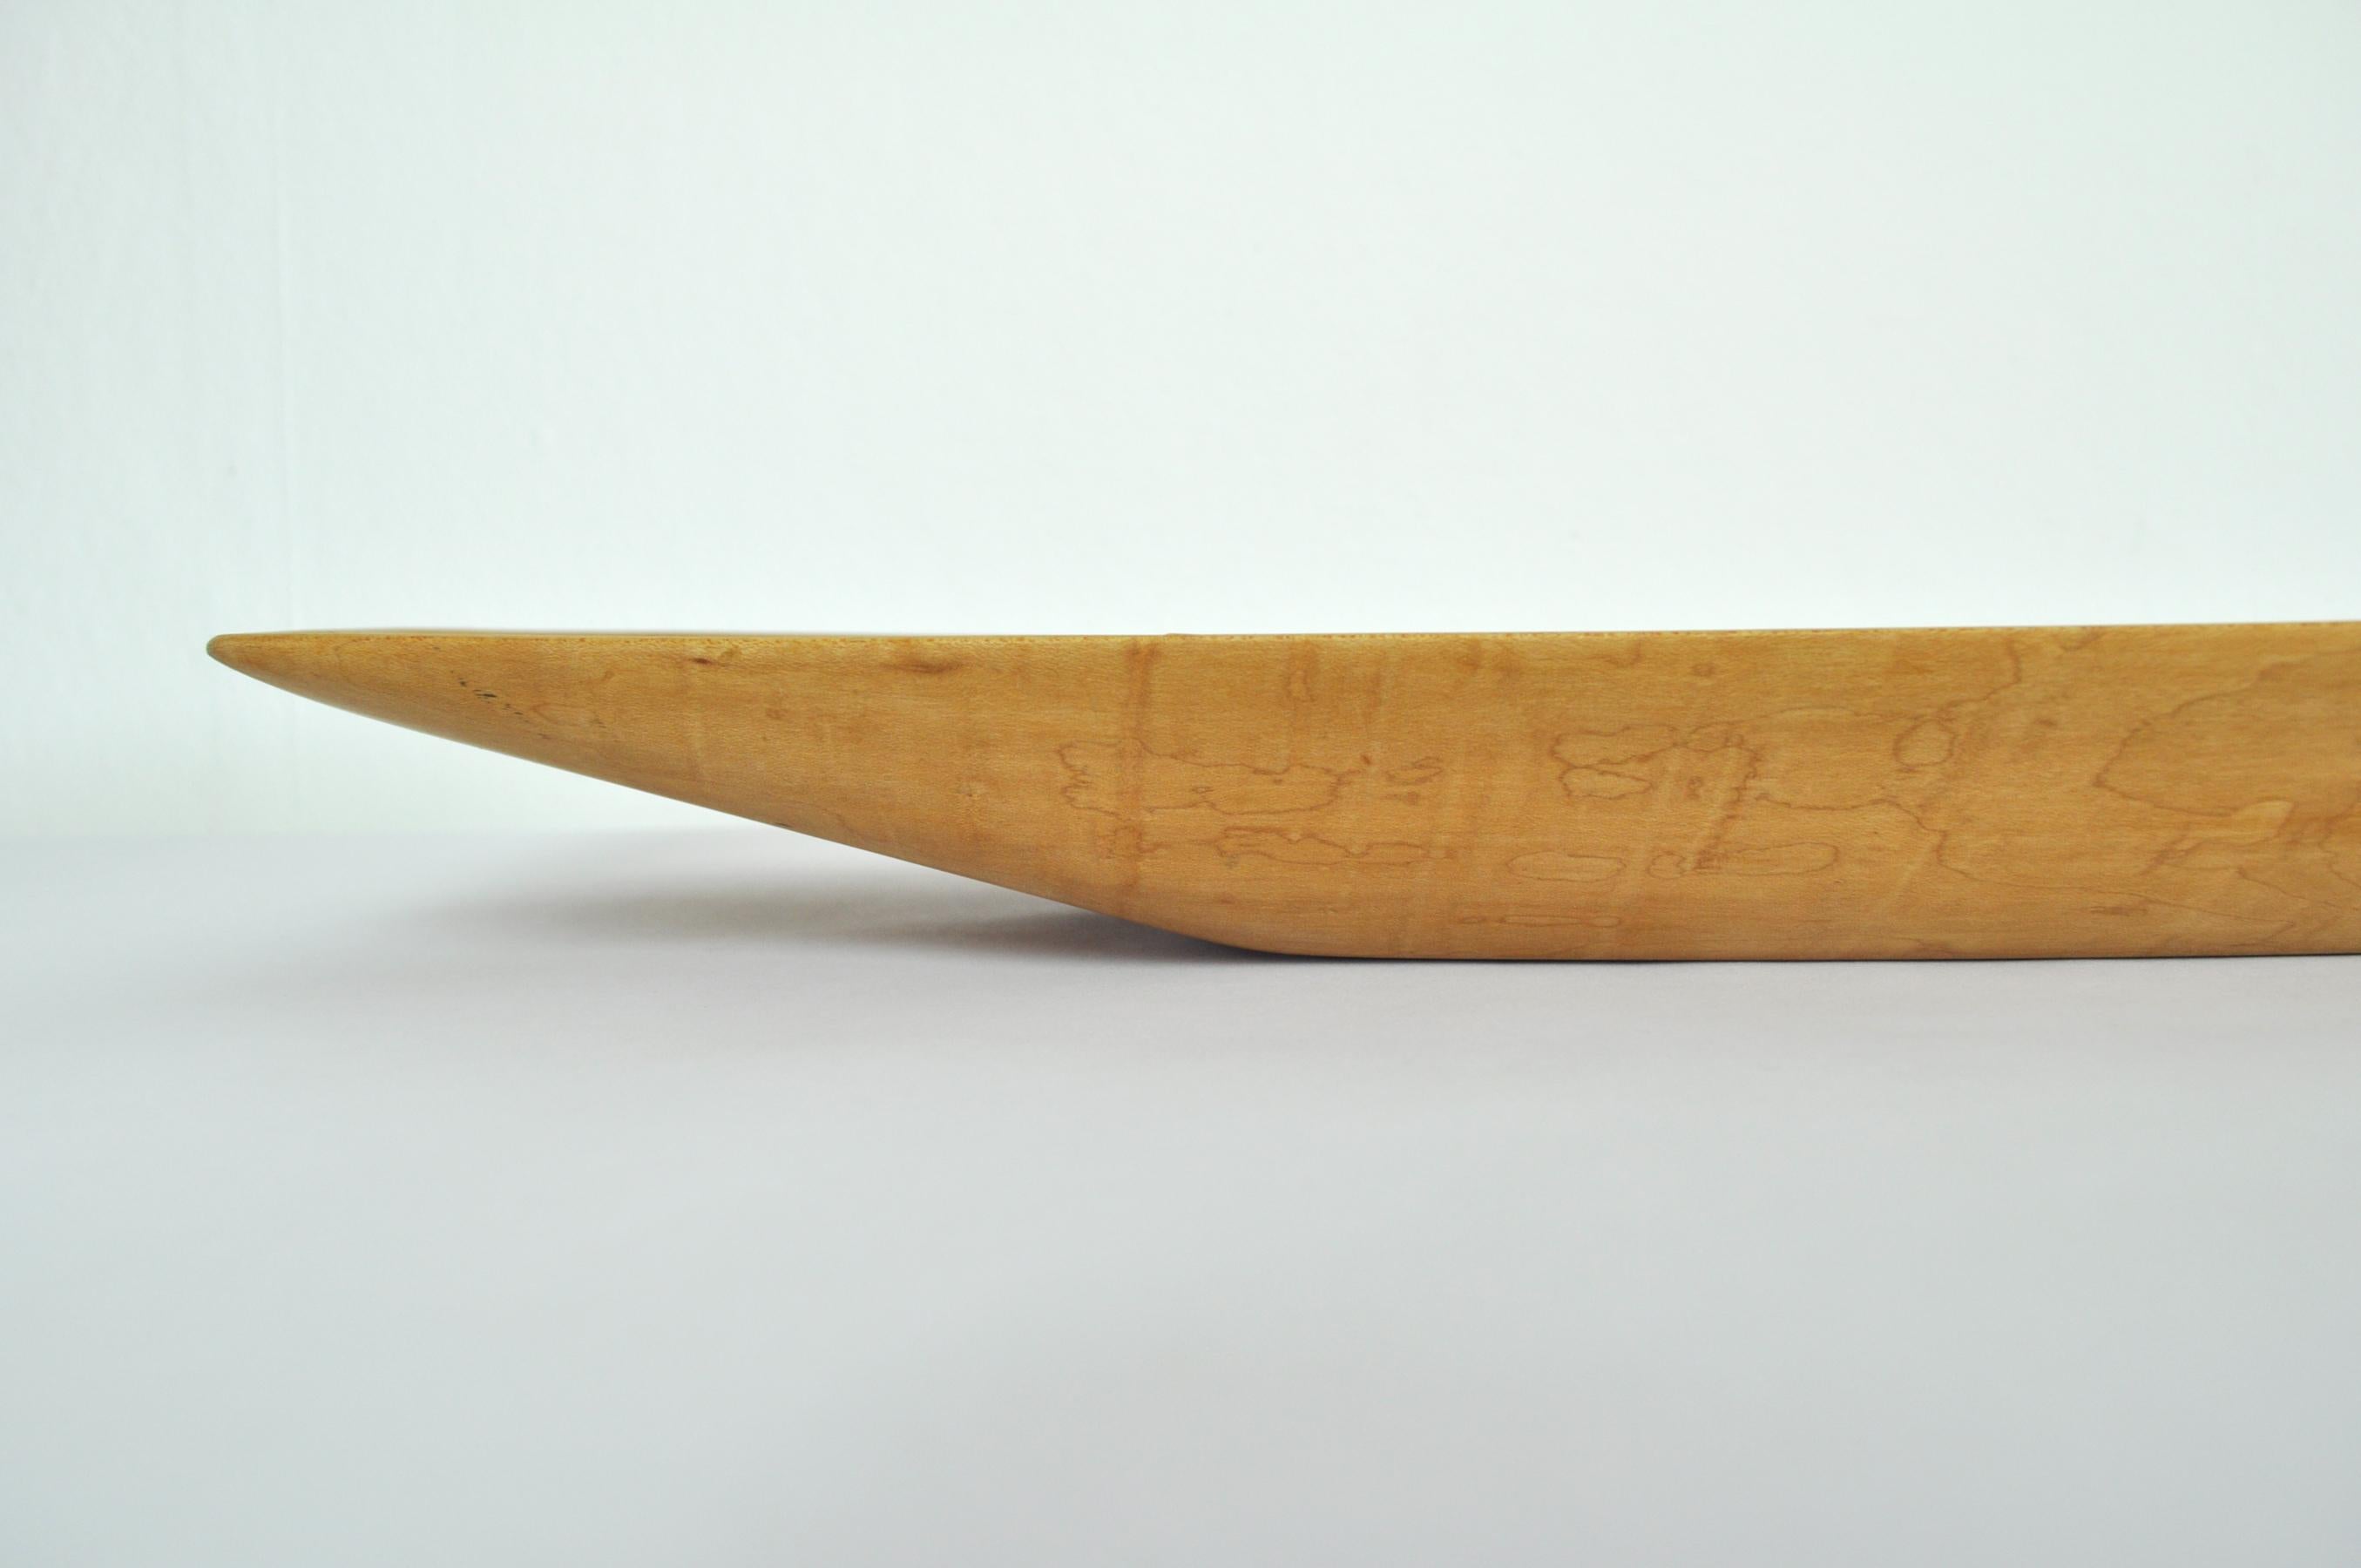 Handcrafted Danish Birch Dish with an Organic Design, 1960s For Sale 4